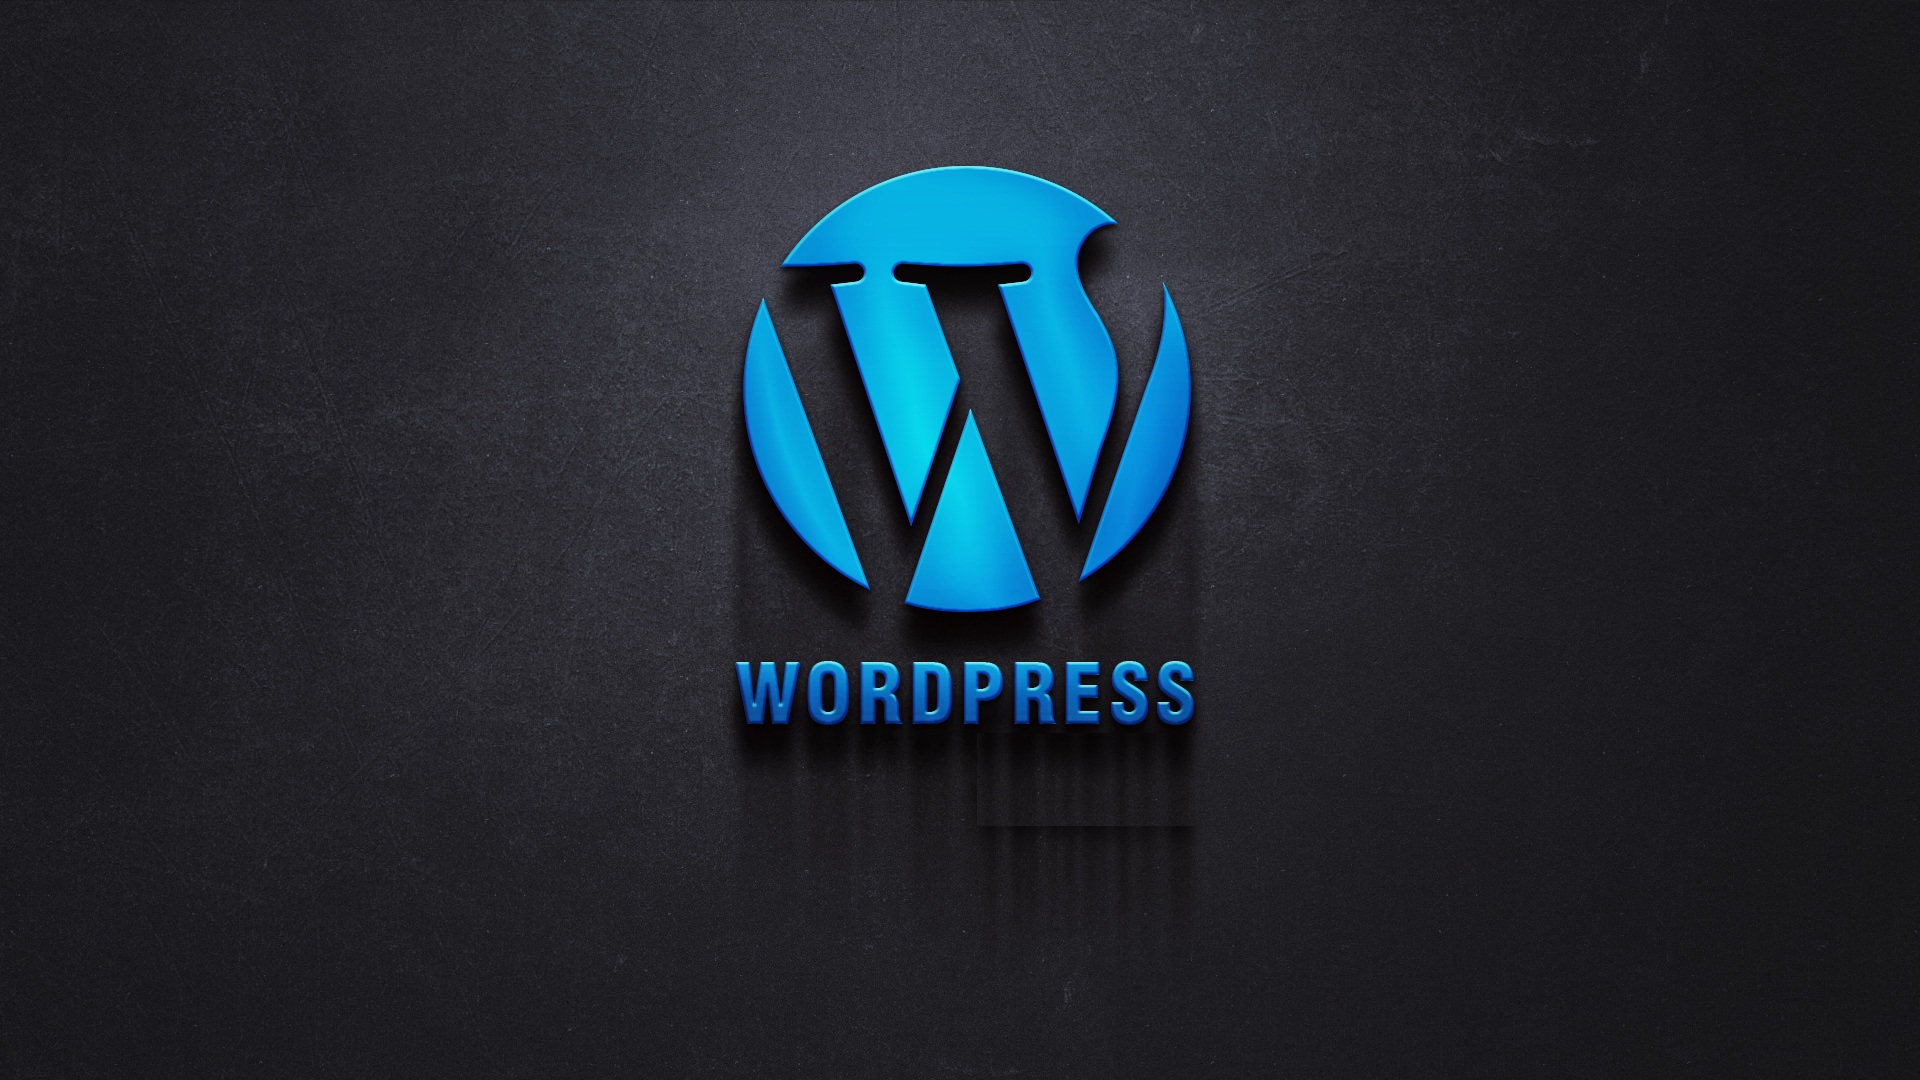 WordPress 5.8 Announced Support for Advanced WebP Image Format